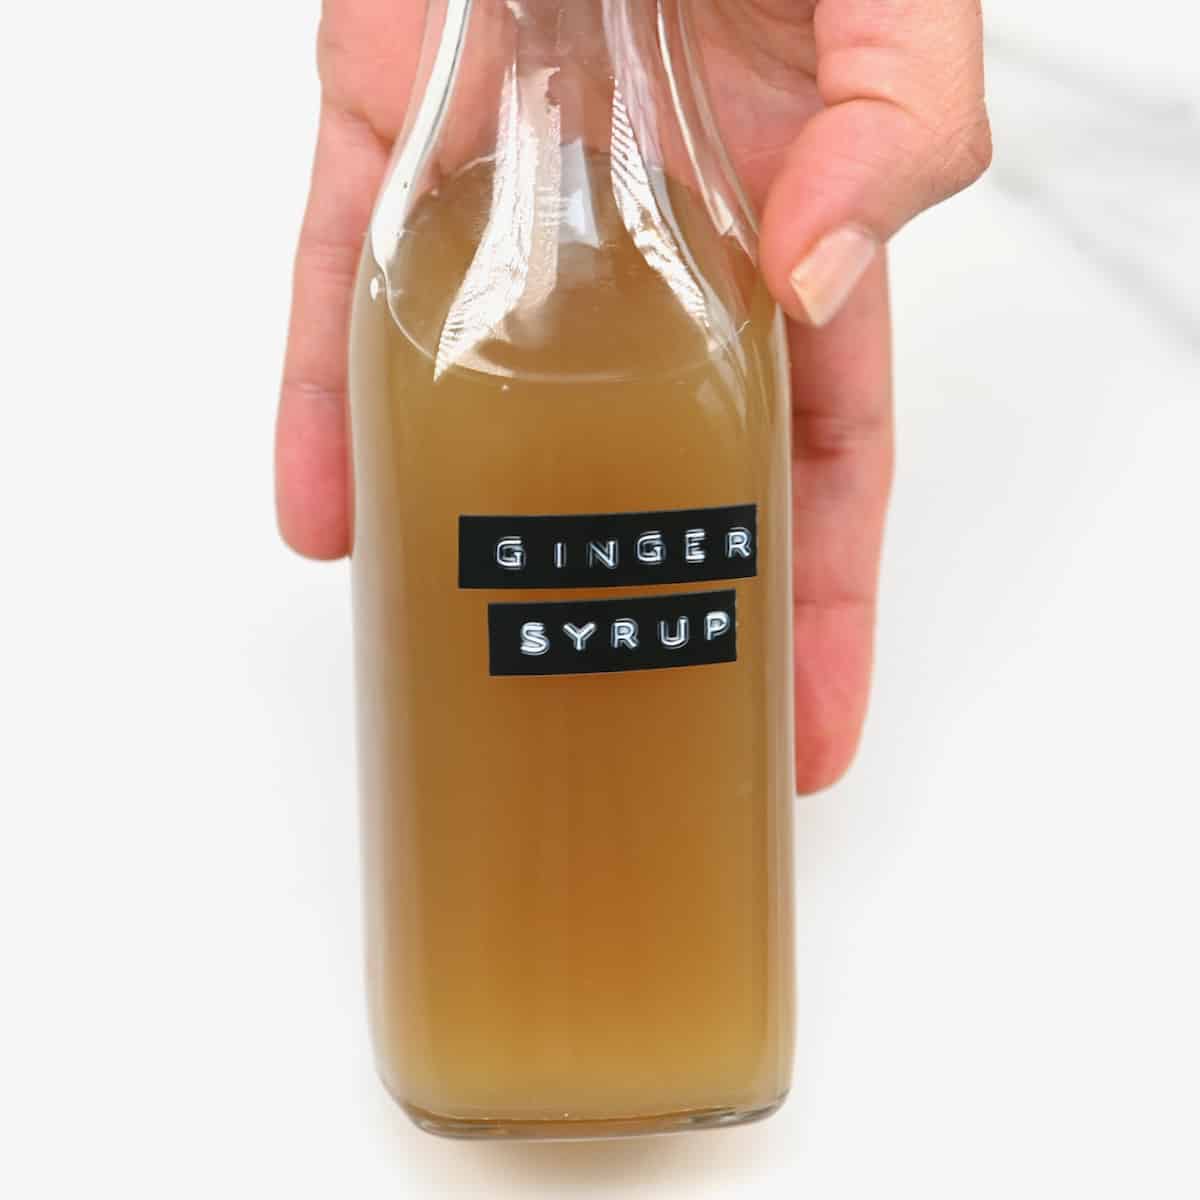 Ginger syrup in a bottle